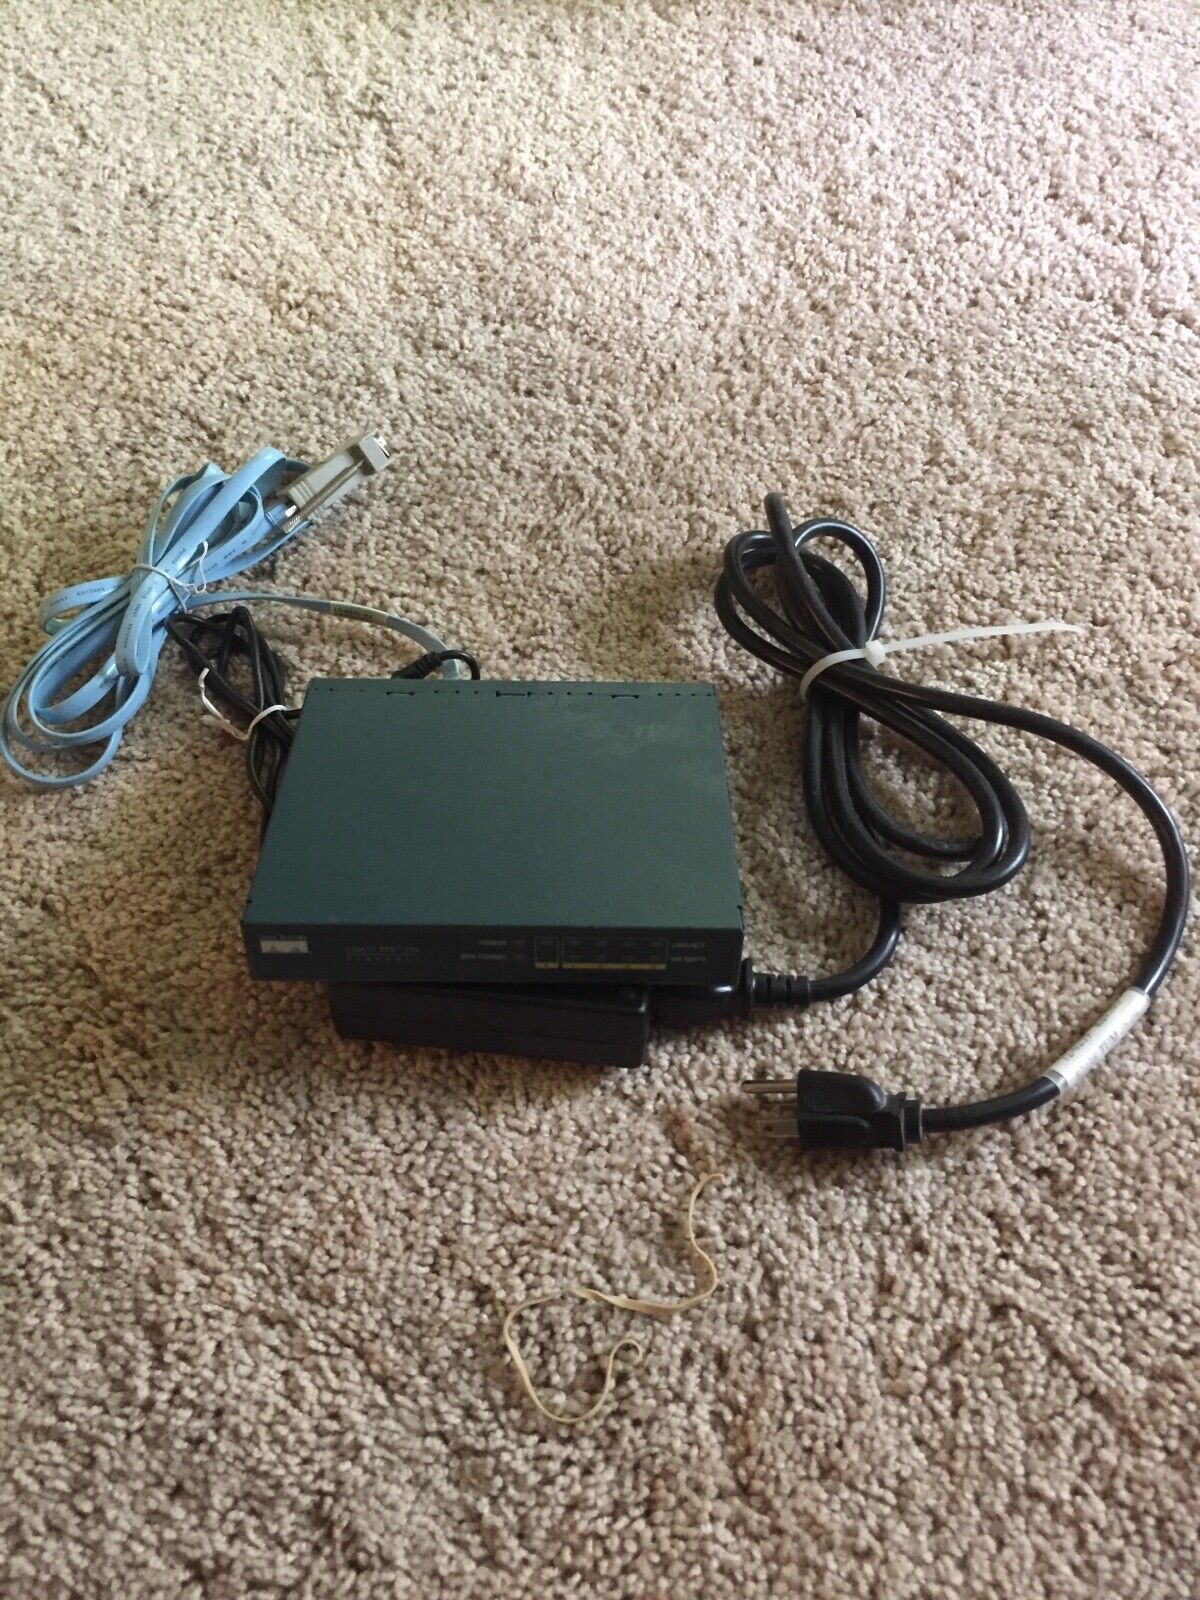 Cisco PIX 501 series firewall with ac adapter and console cable (CNS6RVPAAA)